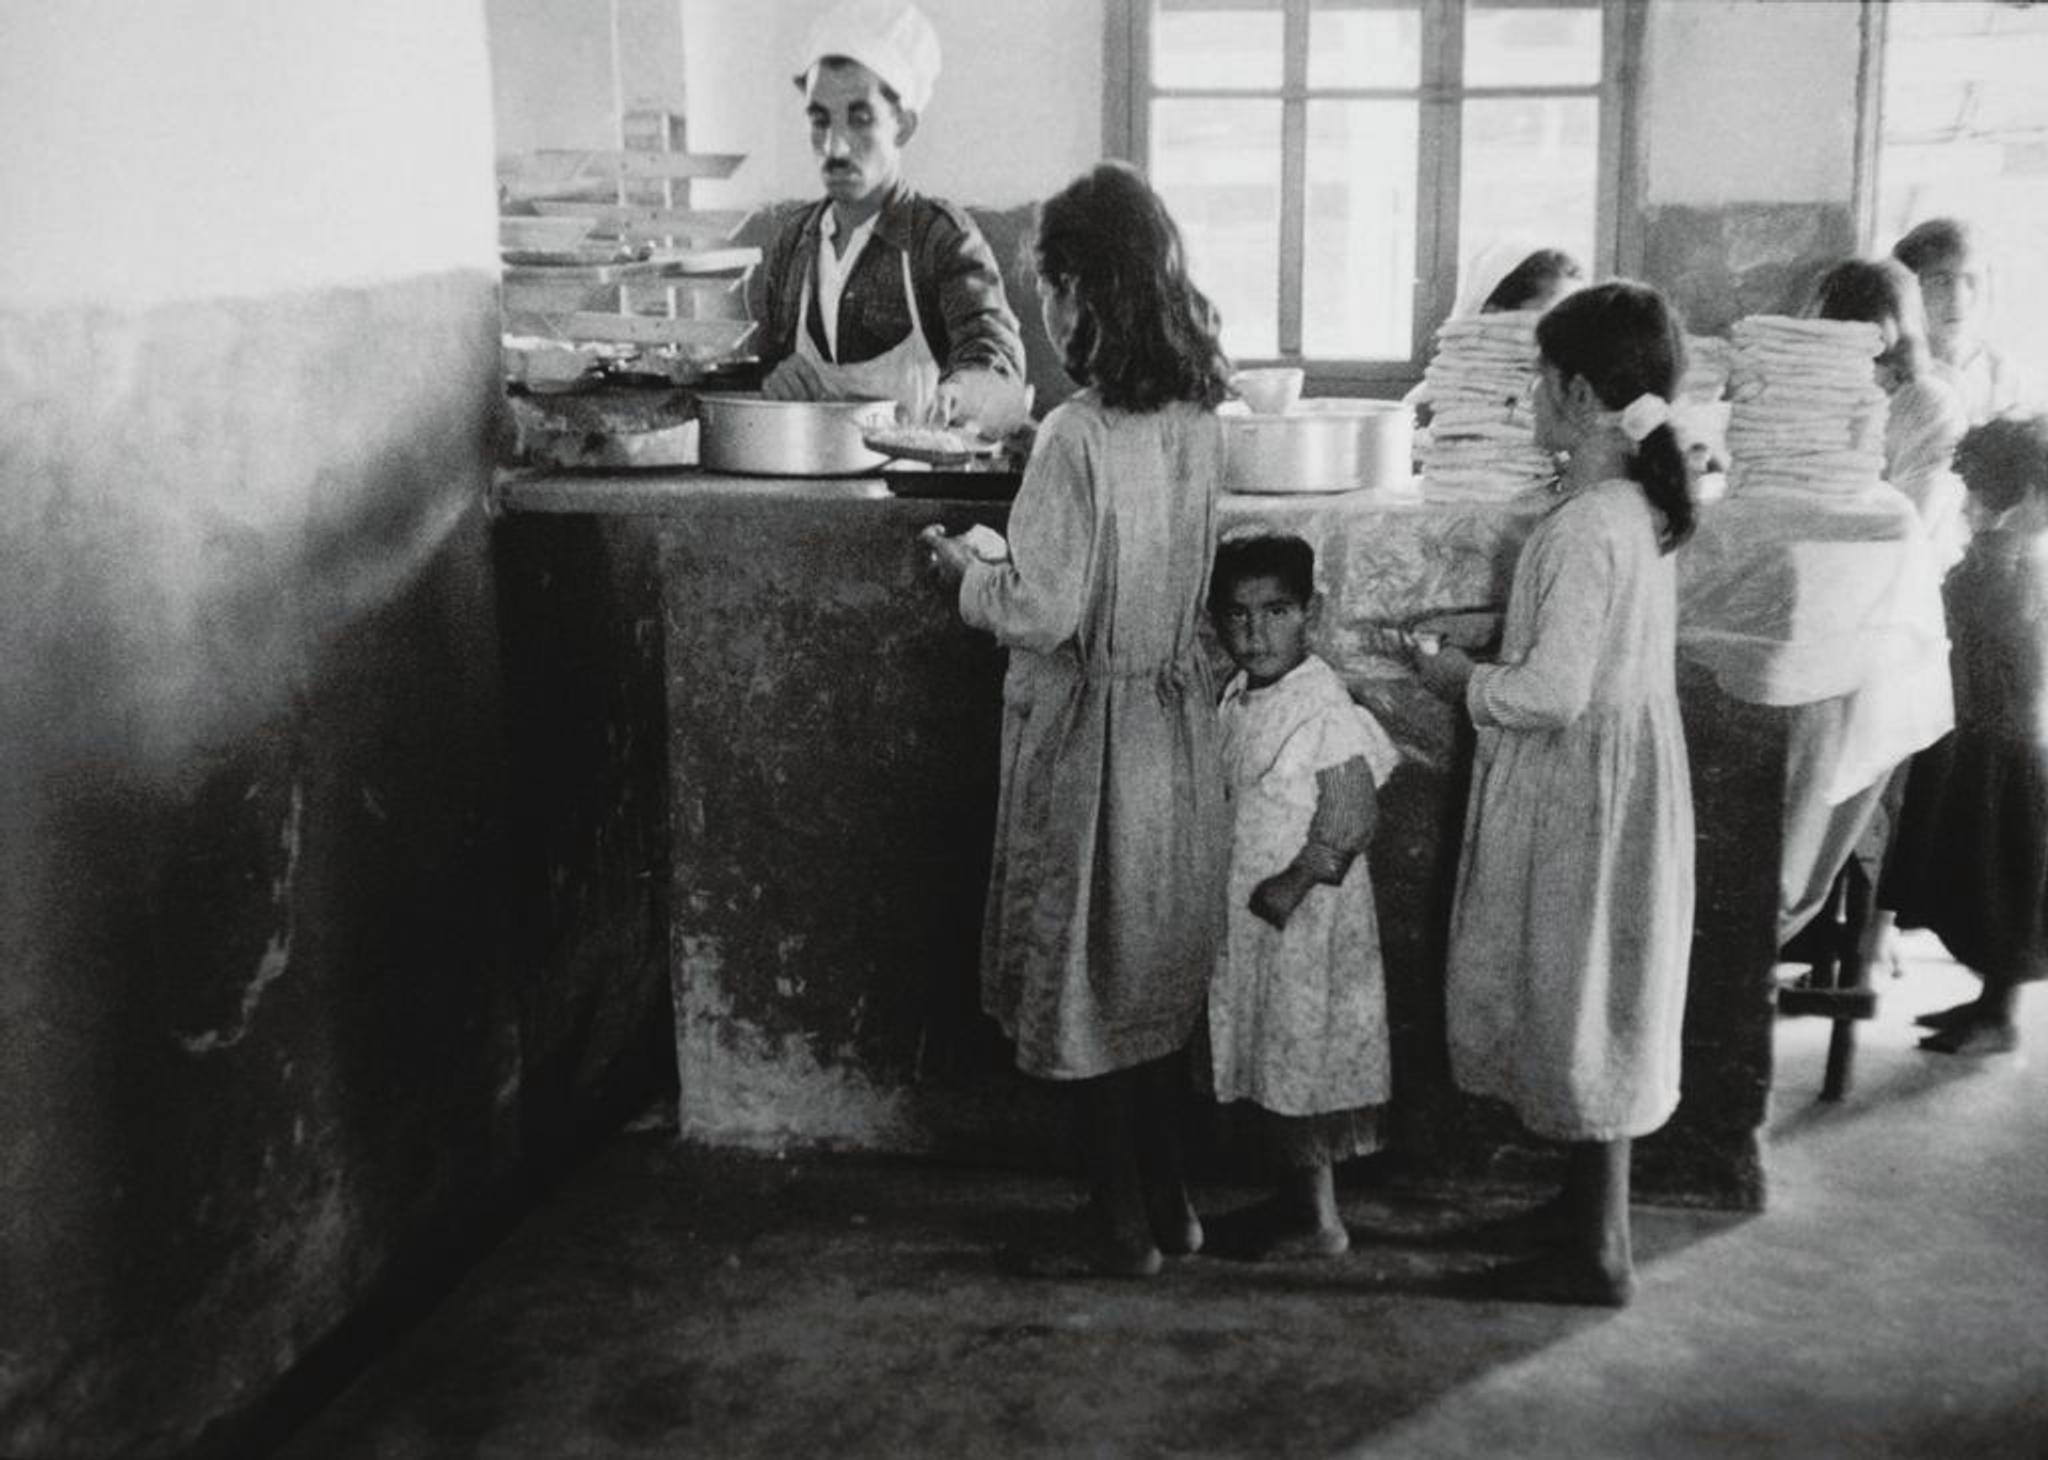 Children in line to get food in a canteen.